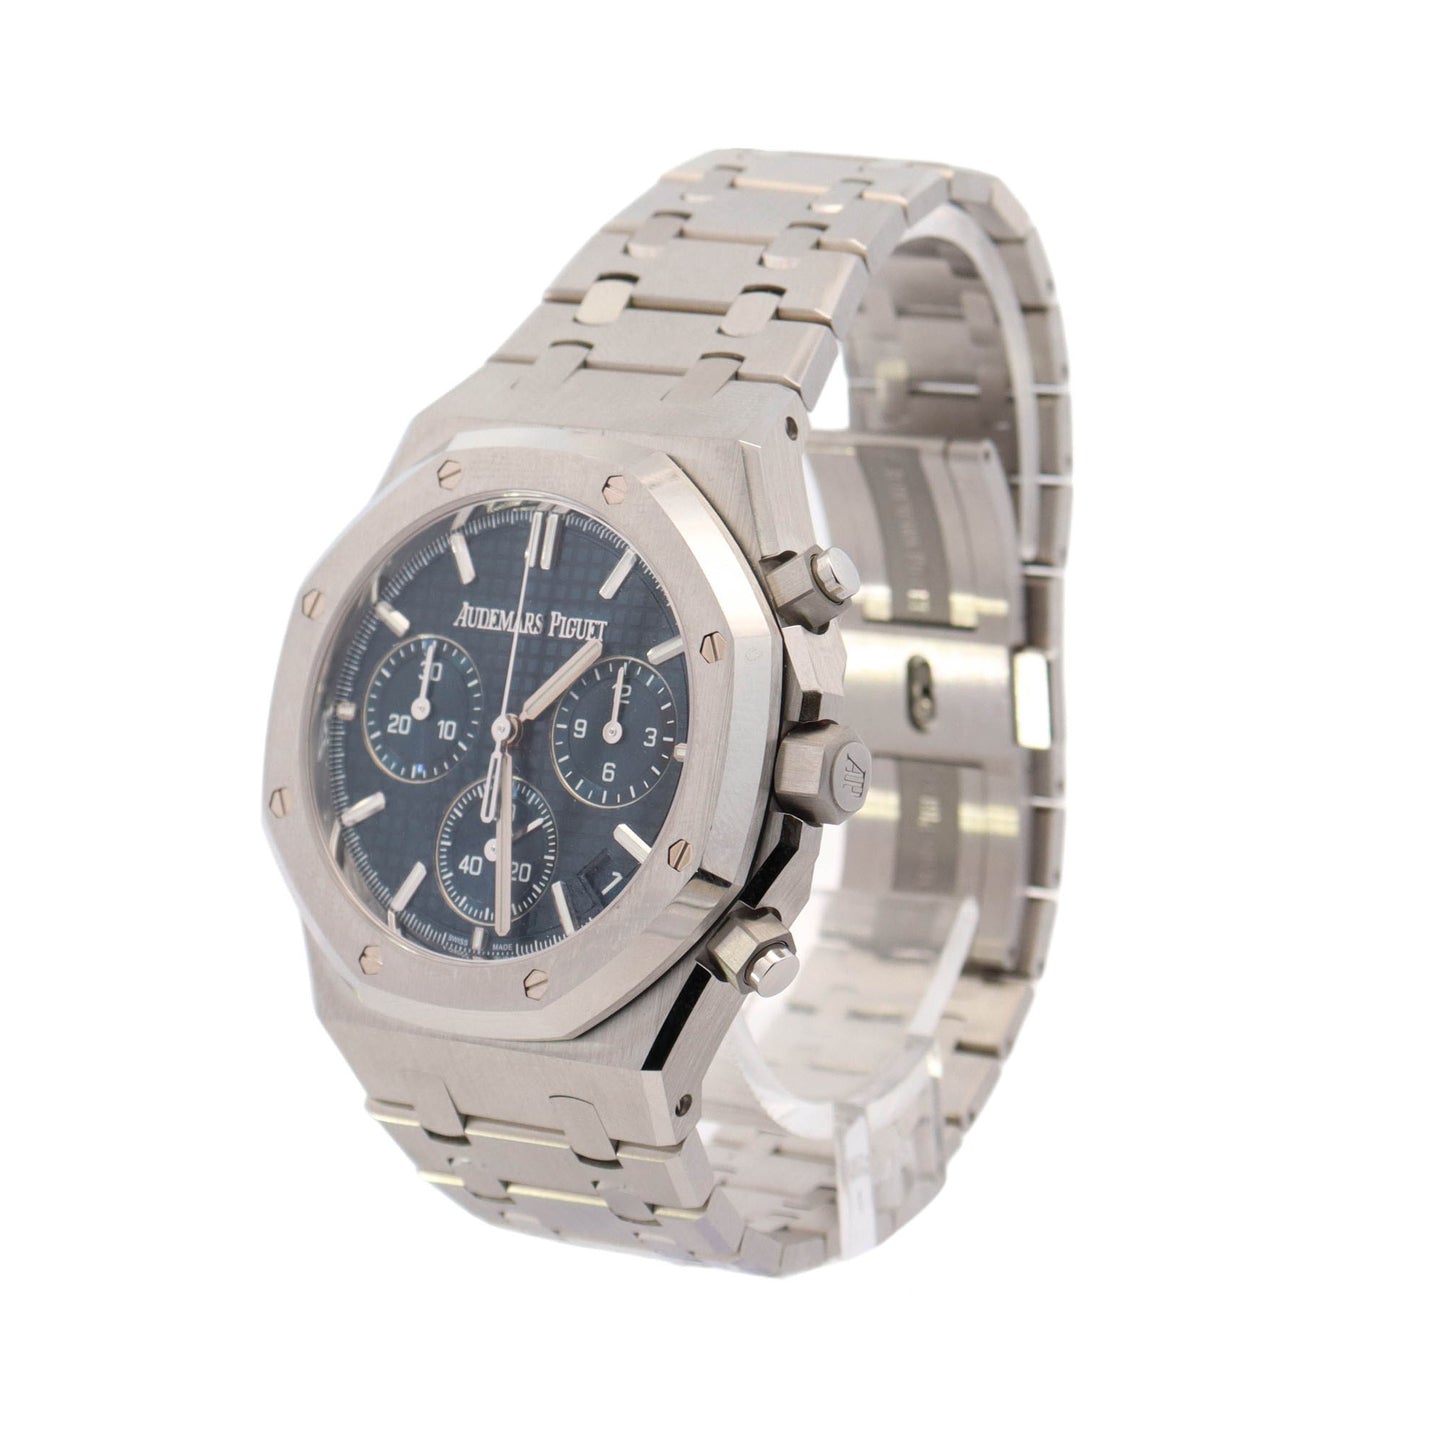 Audemars Piguet Royal Oak Stainless Steel 41mm Blue Chronograph Dial Watch Reference# 26240ST - Happy Jewelers Fine Jewelry Lifetime Warranty